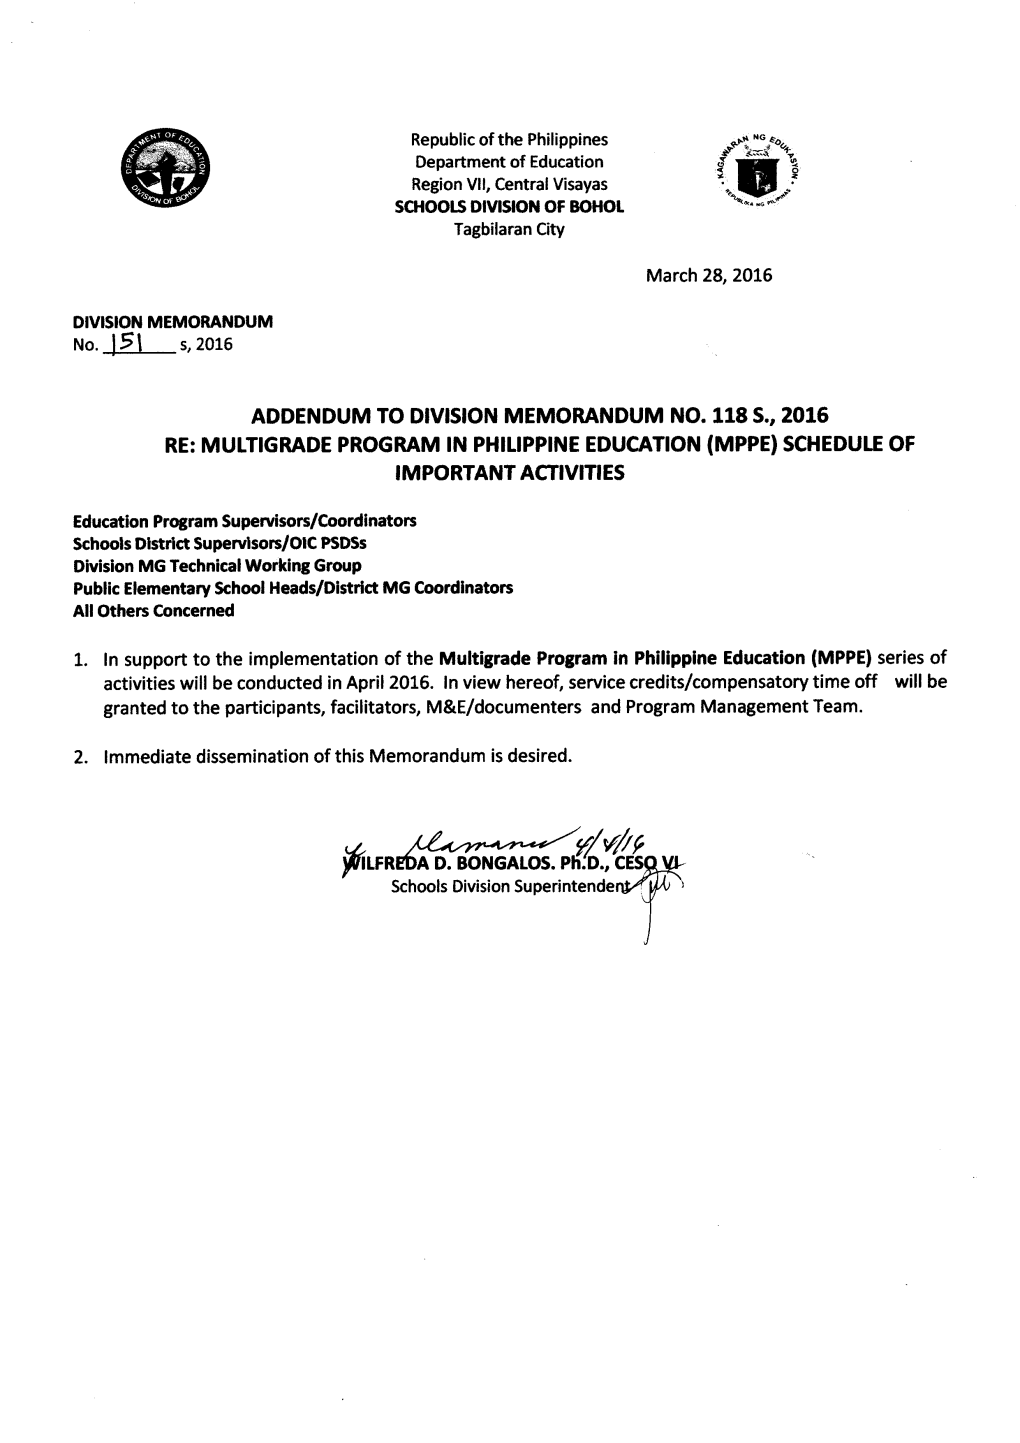 Re: Multigrade Program in Philippine Education (Mppe) Schedule of Important Activities